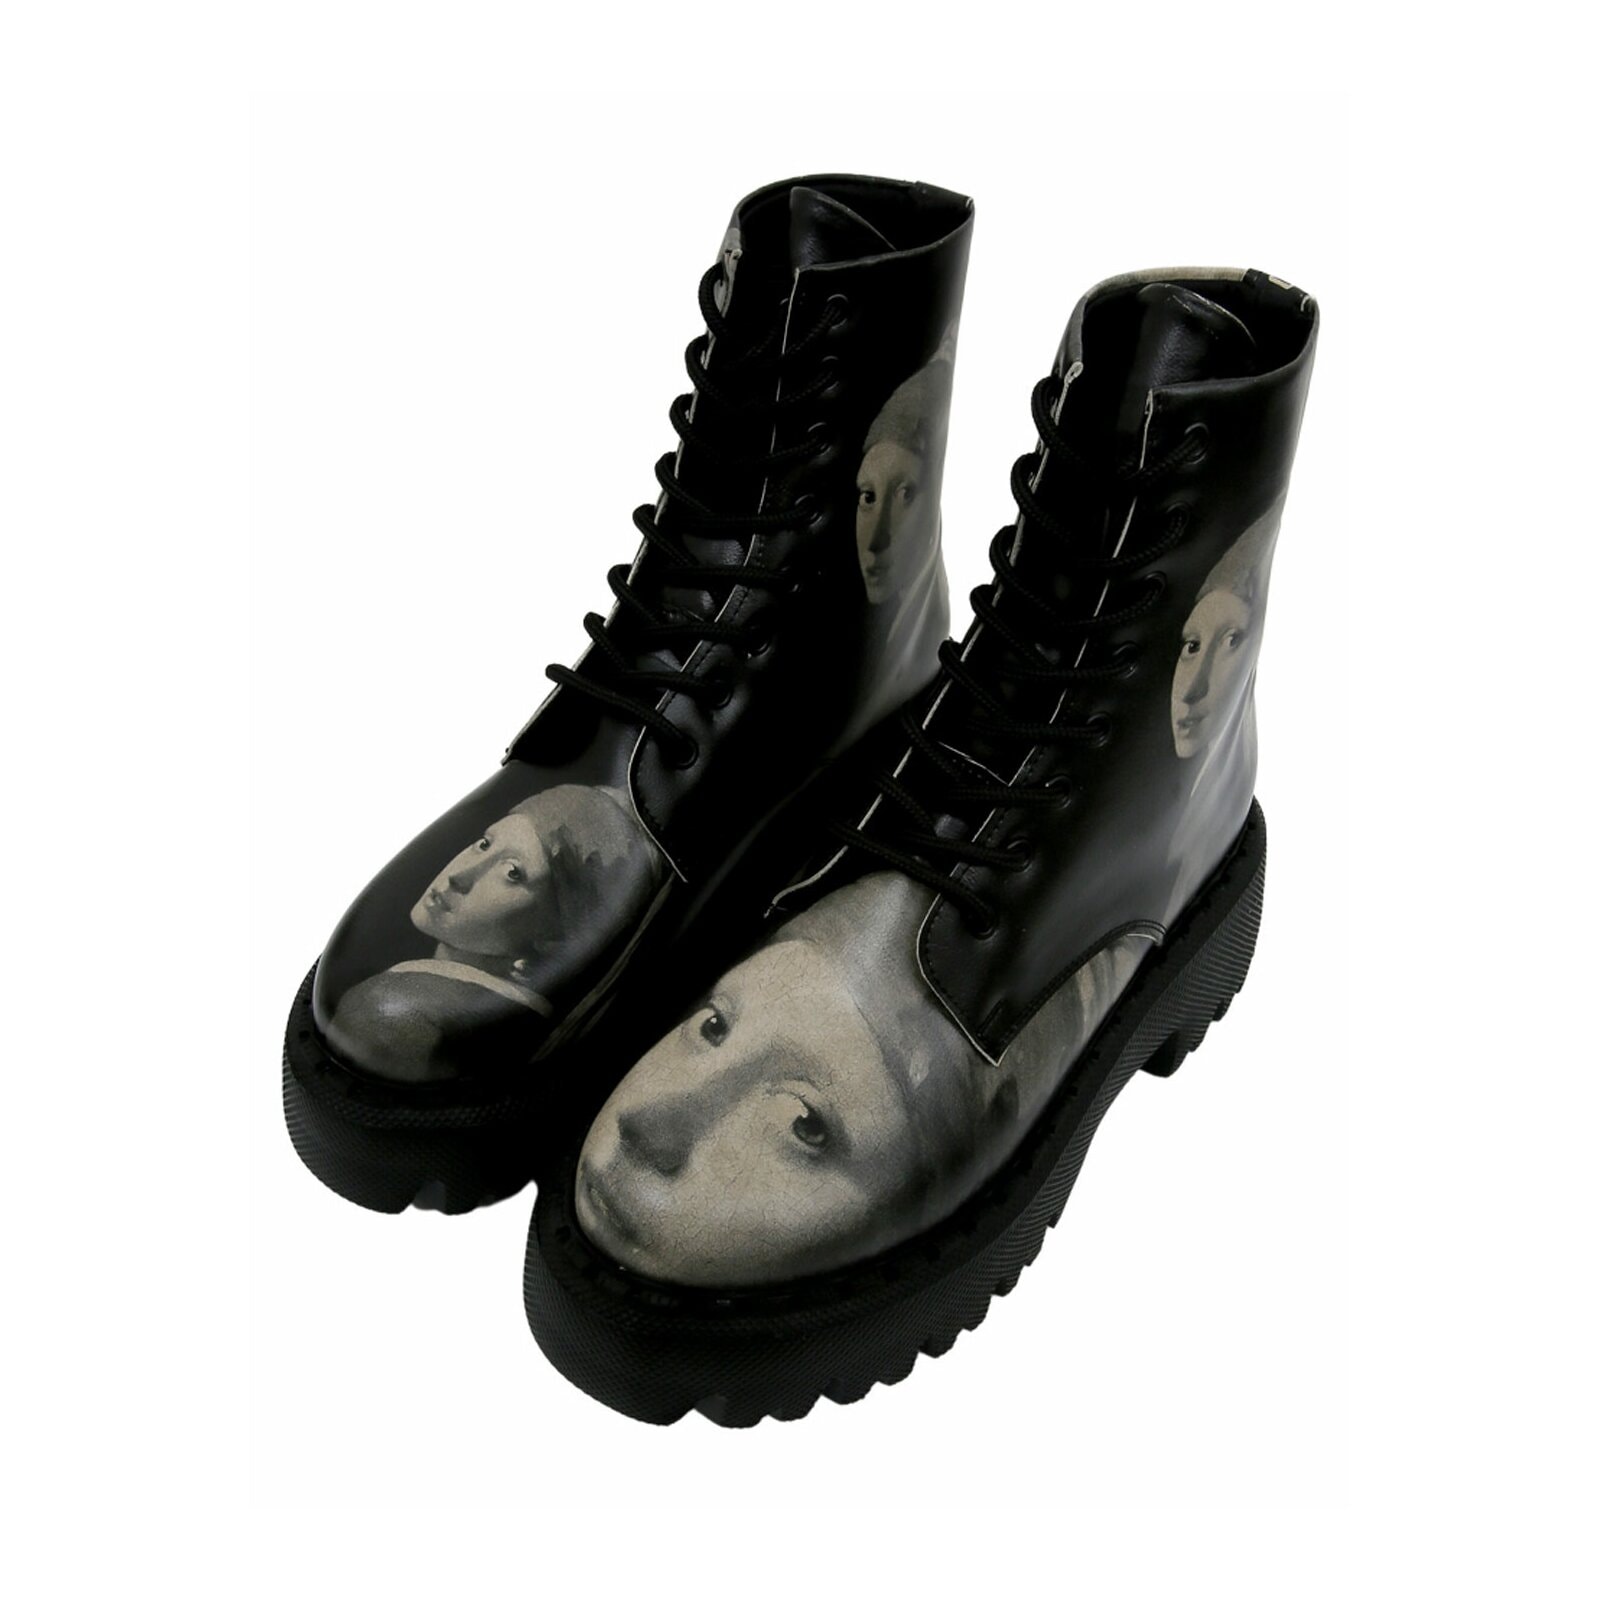 DOGO Chelseaboots »Girl with A Pearl Earring BW«, Vegan